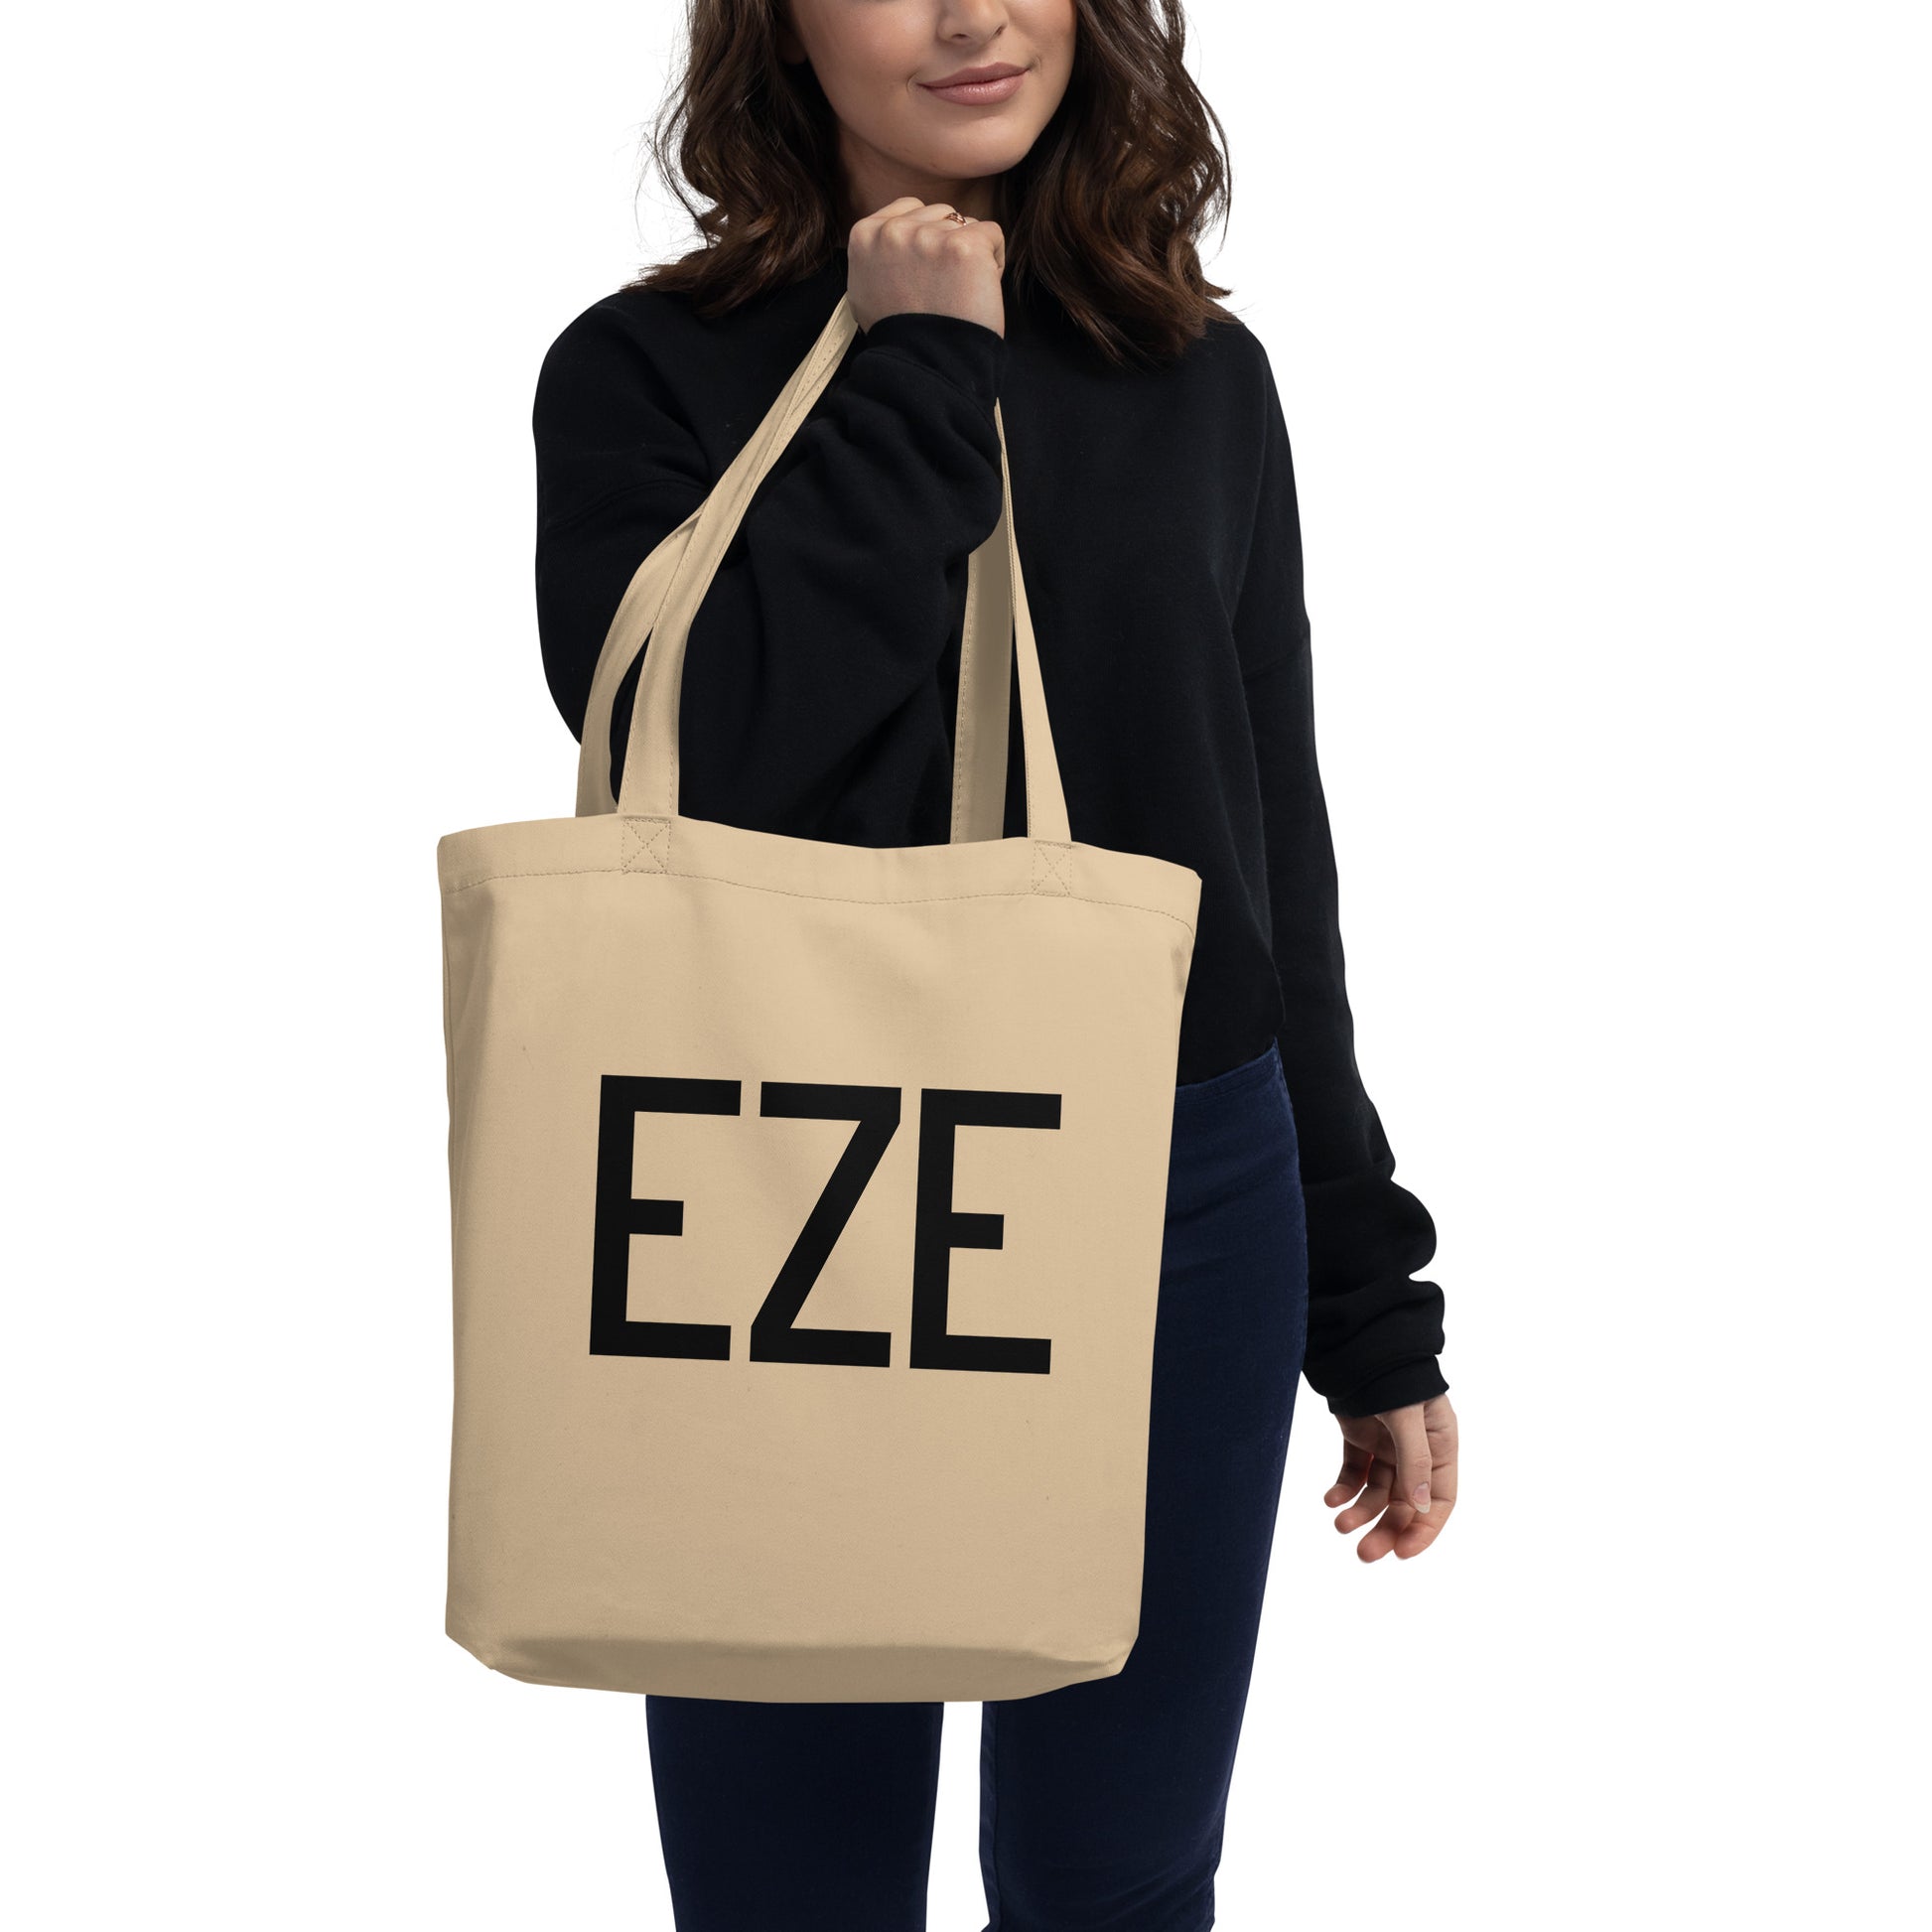 Aviation Gift Organic Tote - Black • EZE Buenos Aires • YHM Designs - Image 03